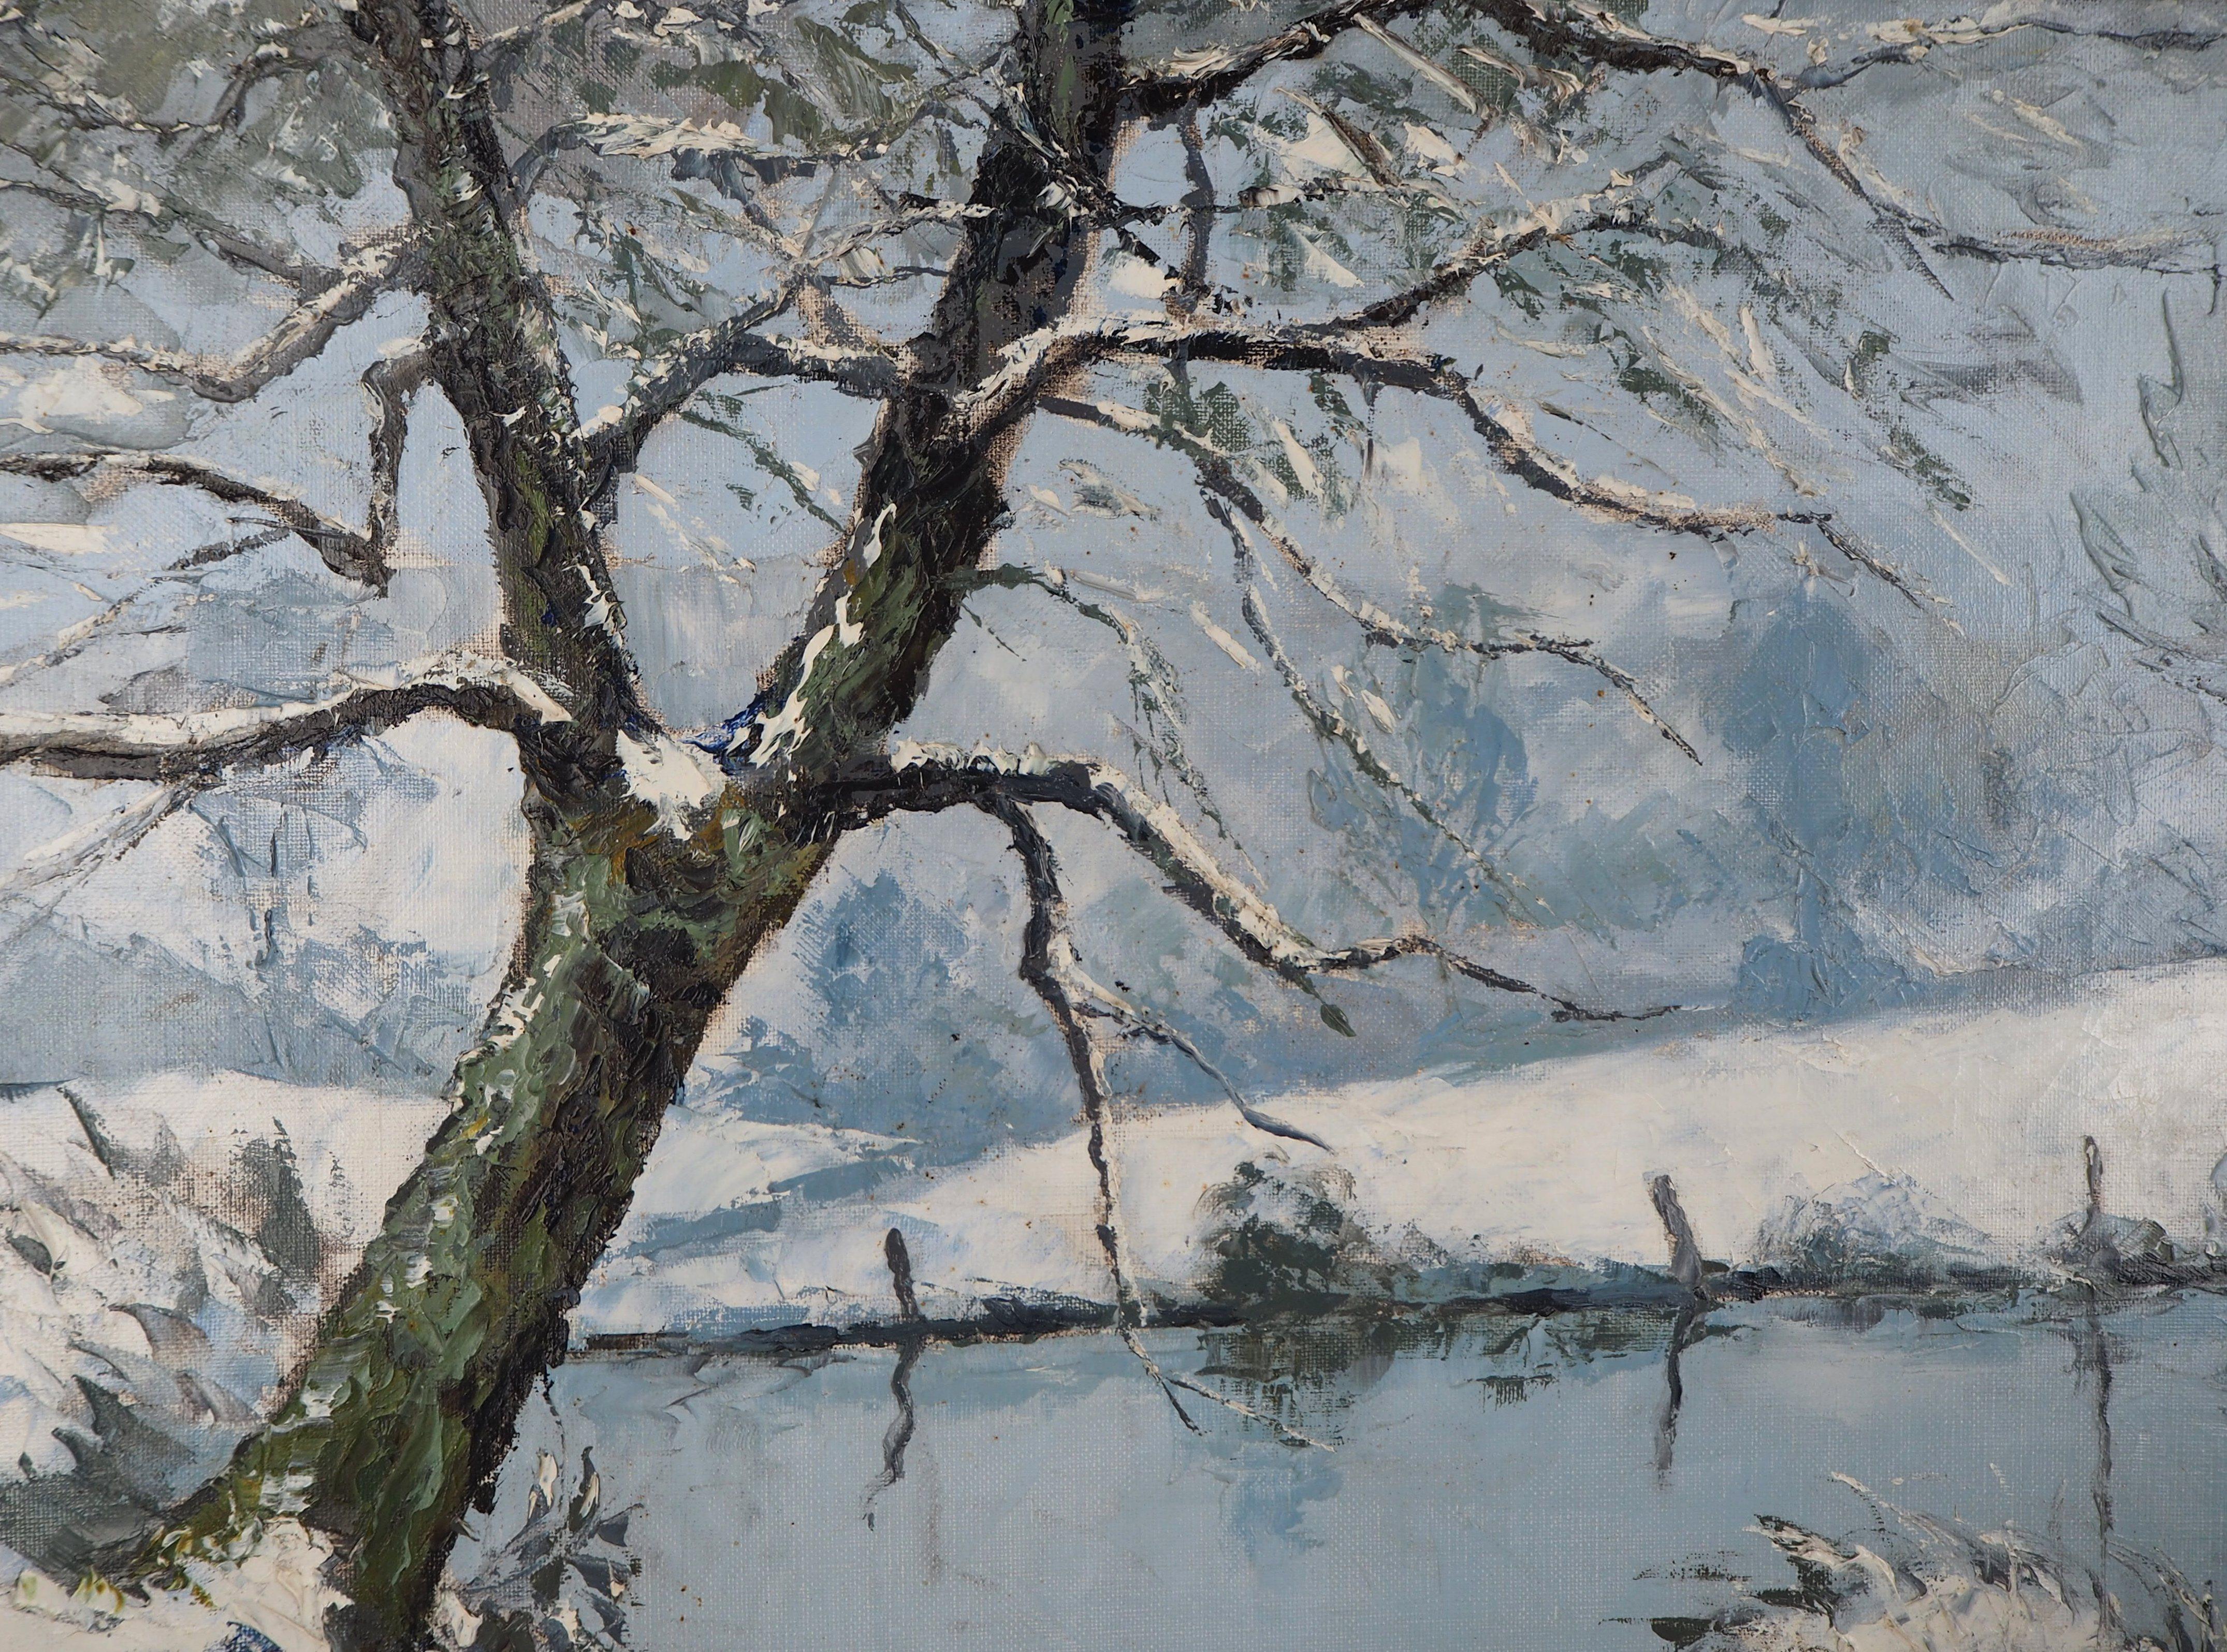 Normandy : Frozen Lake and Snow - Original oil on canvas, Handsigned 2